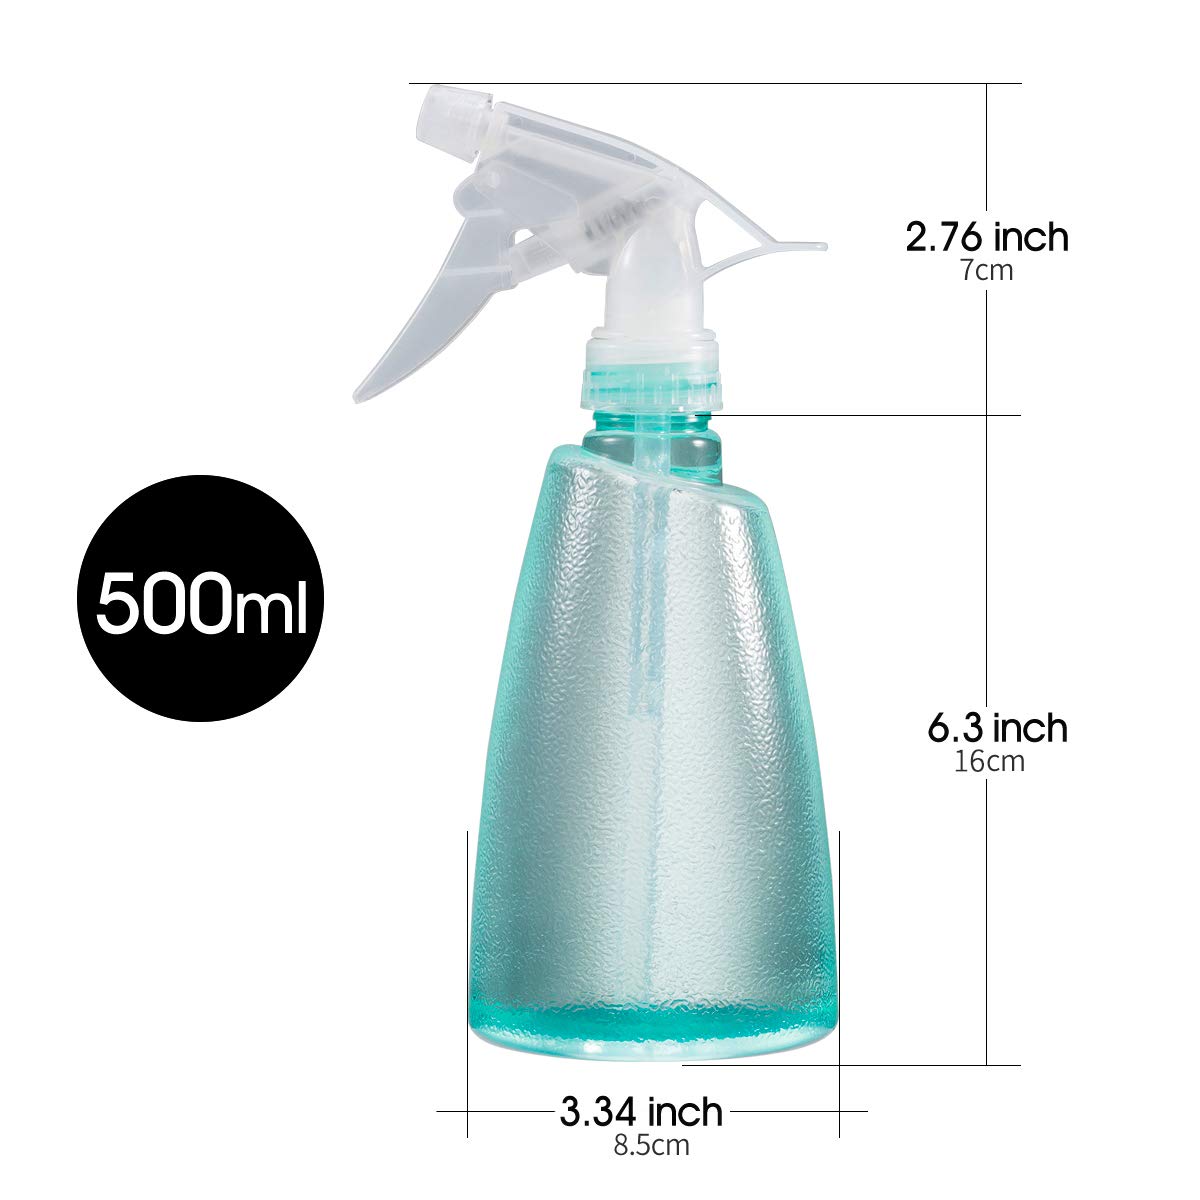 REPUGO Empty Plastic Spray Bottles(3 pack)–17oz Spray Bottle, Squirt Bottle, Plastic Spray Bottles for Cleaning Solutions, Hair, Essential Oil, Plants, Refillable Sprayer with Mist and Stream Mode